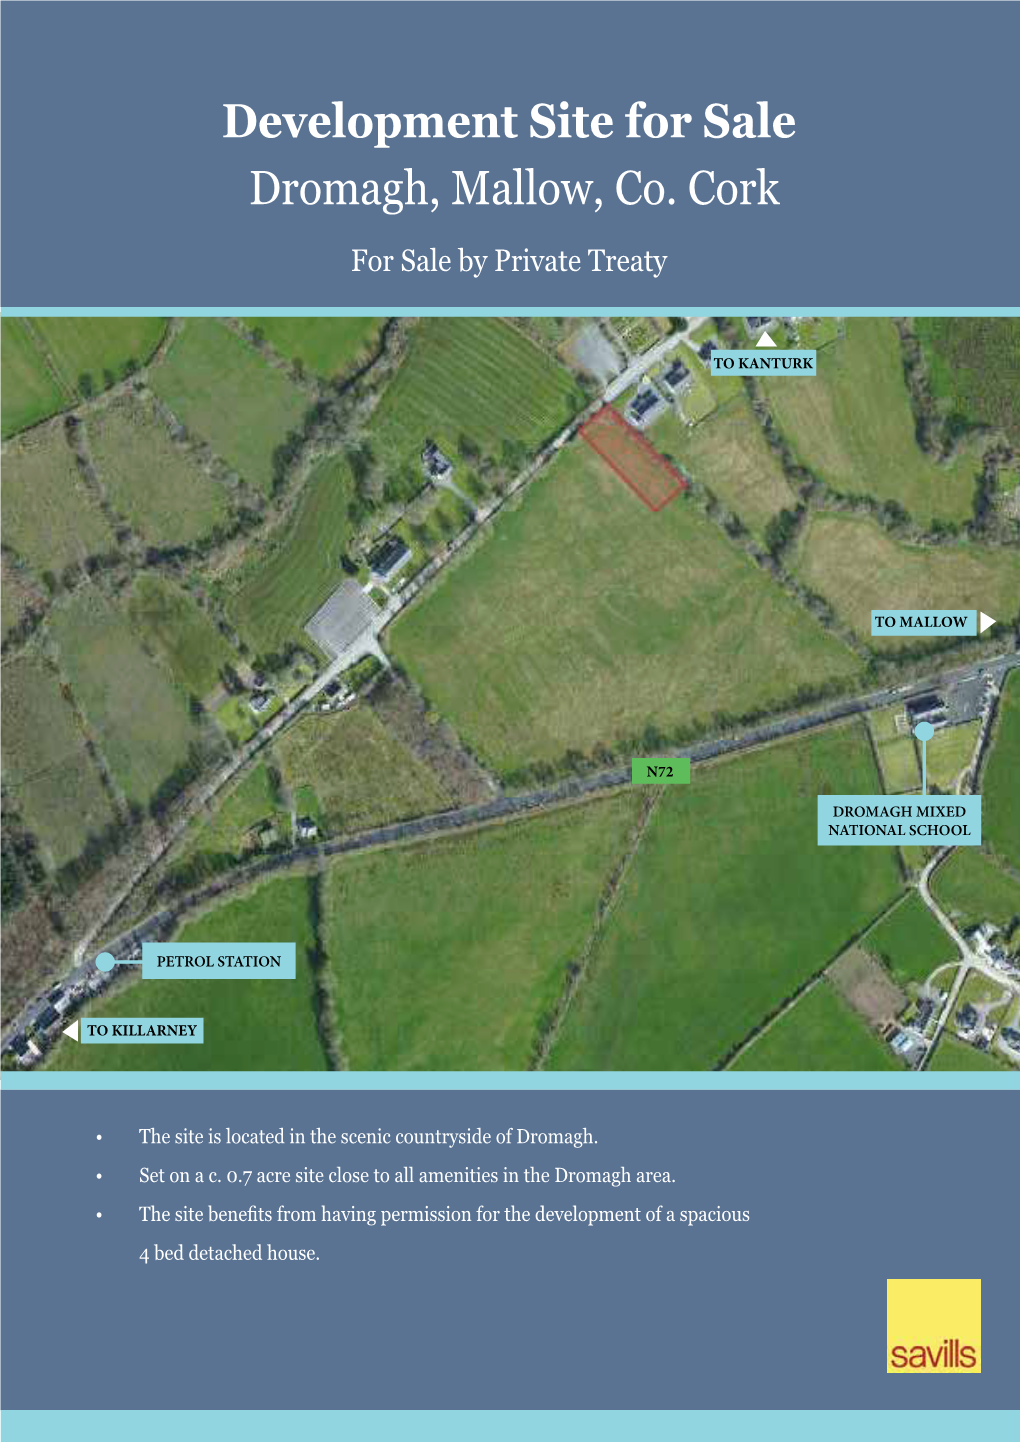 Development Site for Sale Dromagh, Mallow, Co. Cork for Sale by Private Treaty